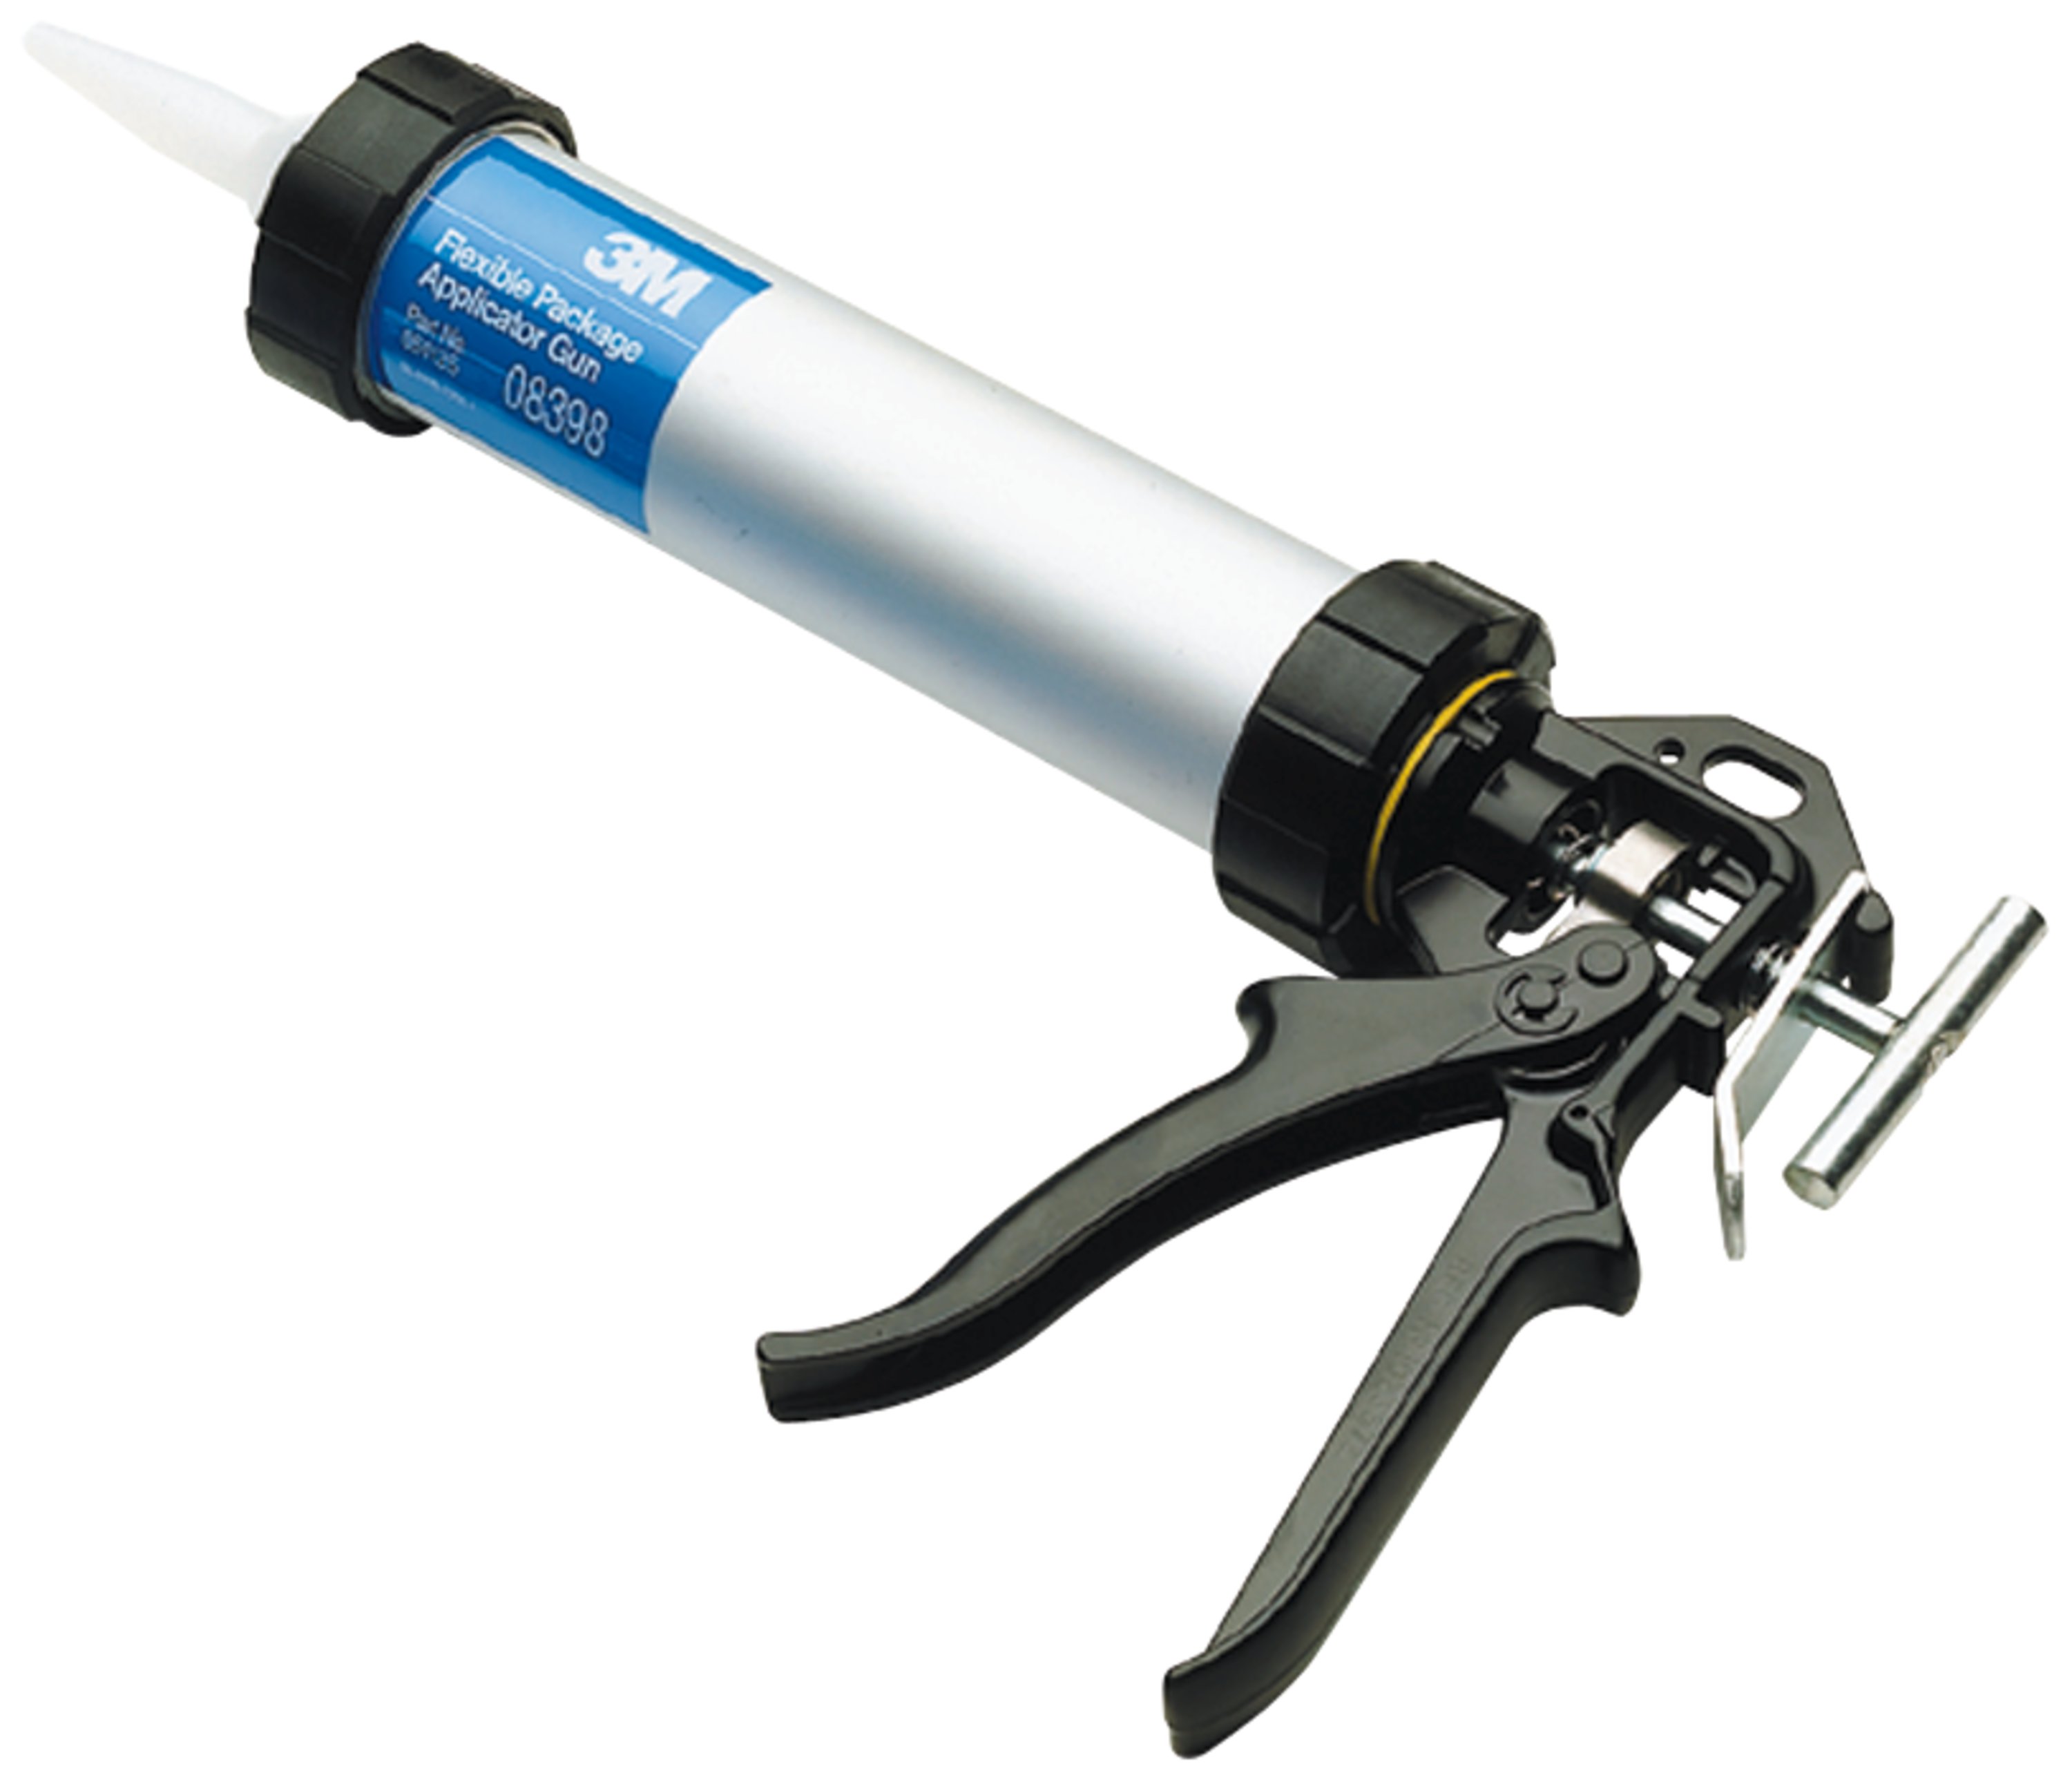 Used in variety of repair applications, the 3M™ Flexible Package Applicator Gun is an essential tool for any auto body shop.